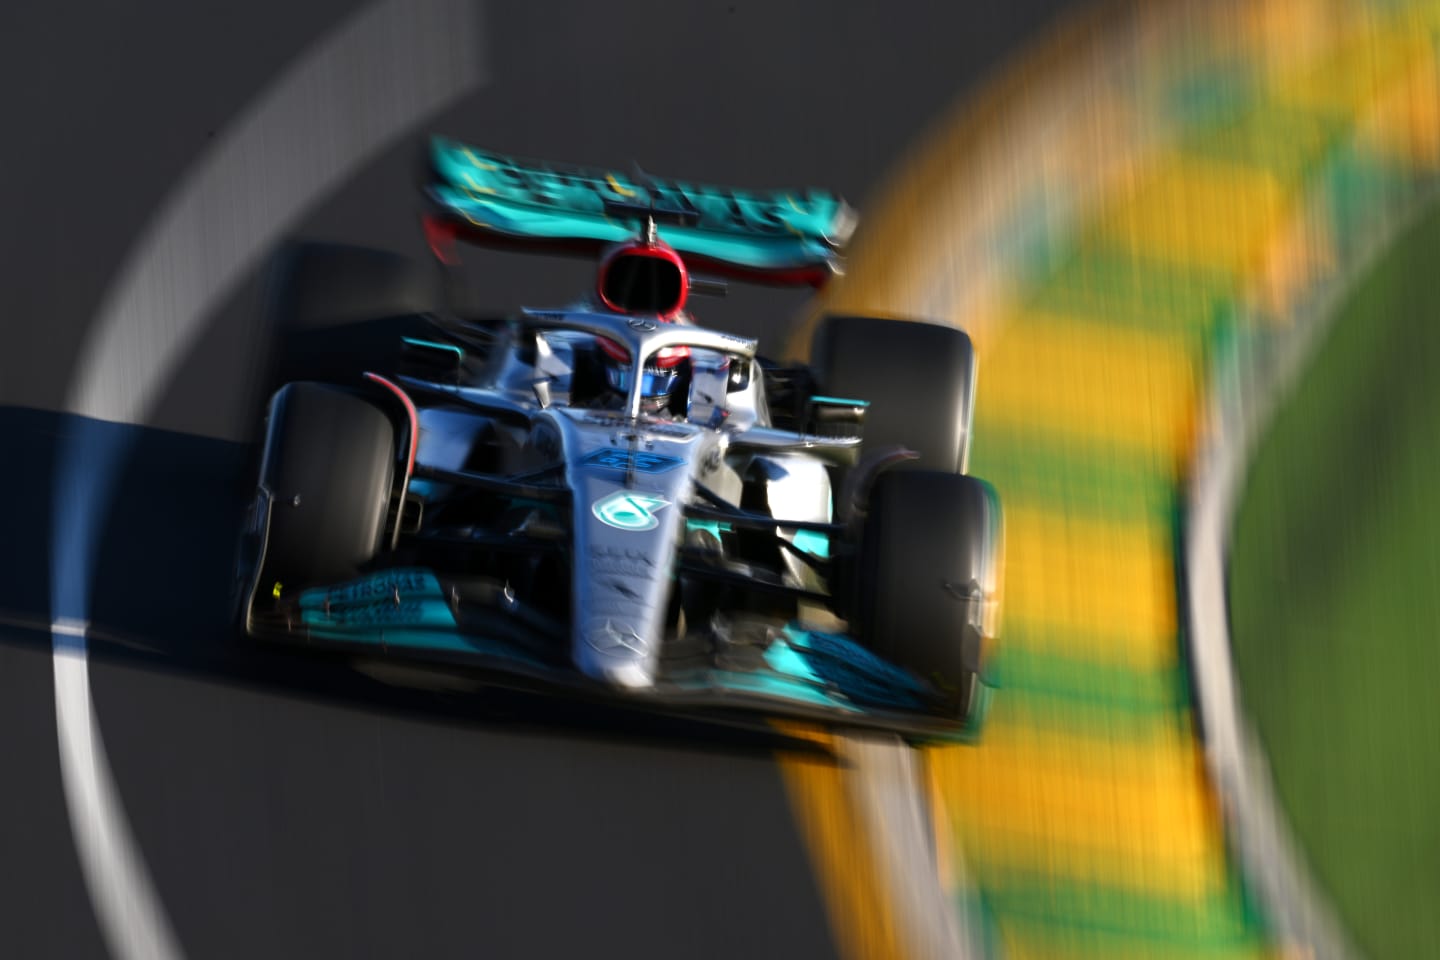 MELBOURNE, AUSTRALIA - APRIL 10: George Russell of Great Britain driving the (63) Mercedes AMG Petronas F1 Team W13 on track during the F1 Grand Prix of Australia at Melbourne Grand Prix Circuit on April 10, 2022 in Melbourne, Australia. (Photo by Clive Mason/Getty Images)